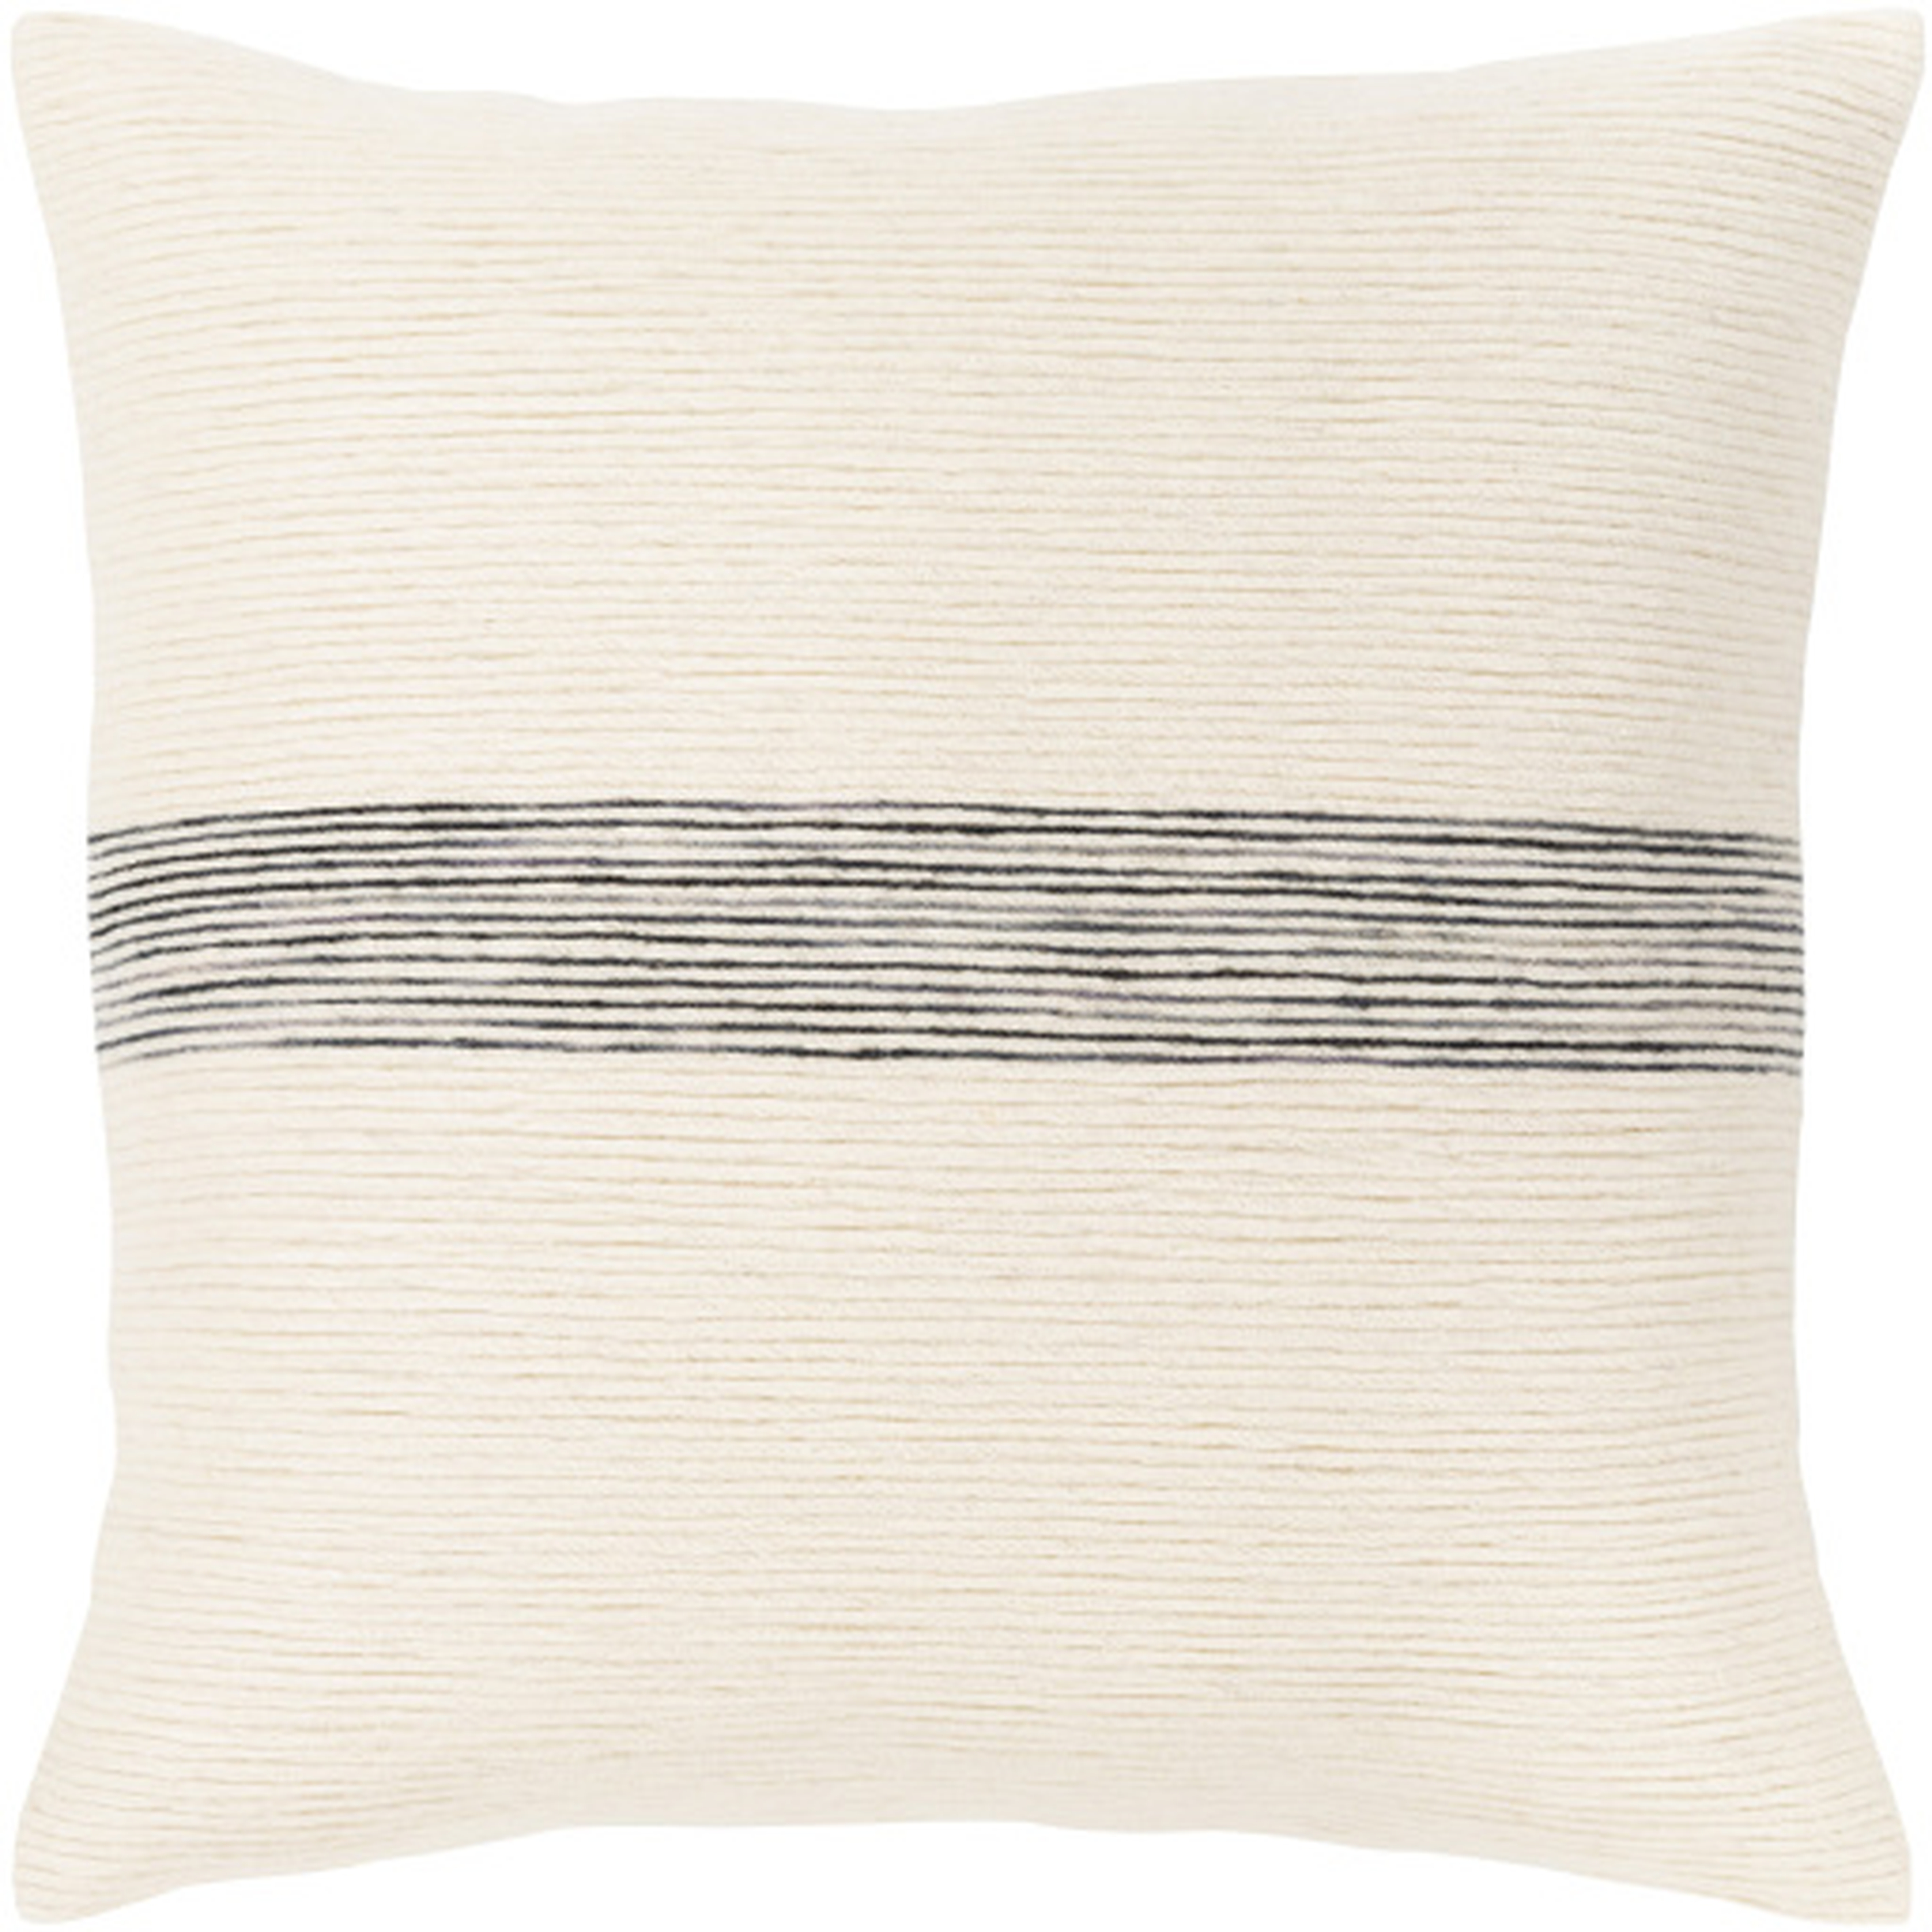 Carine Throw Pillow, 18" x 18", with down insert - Surya